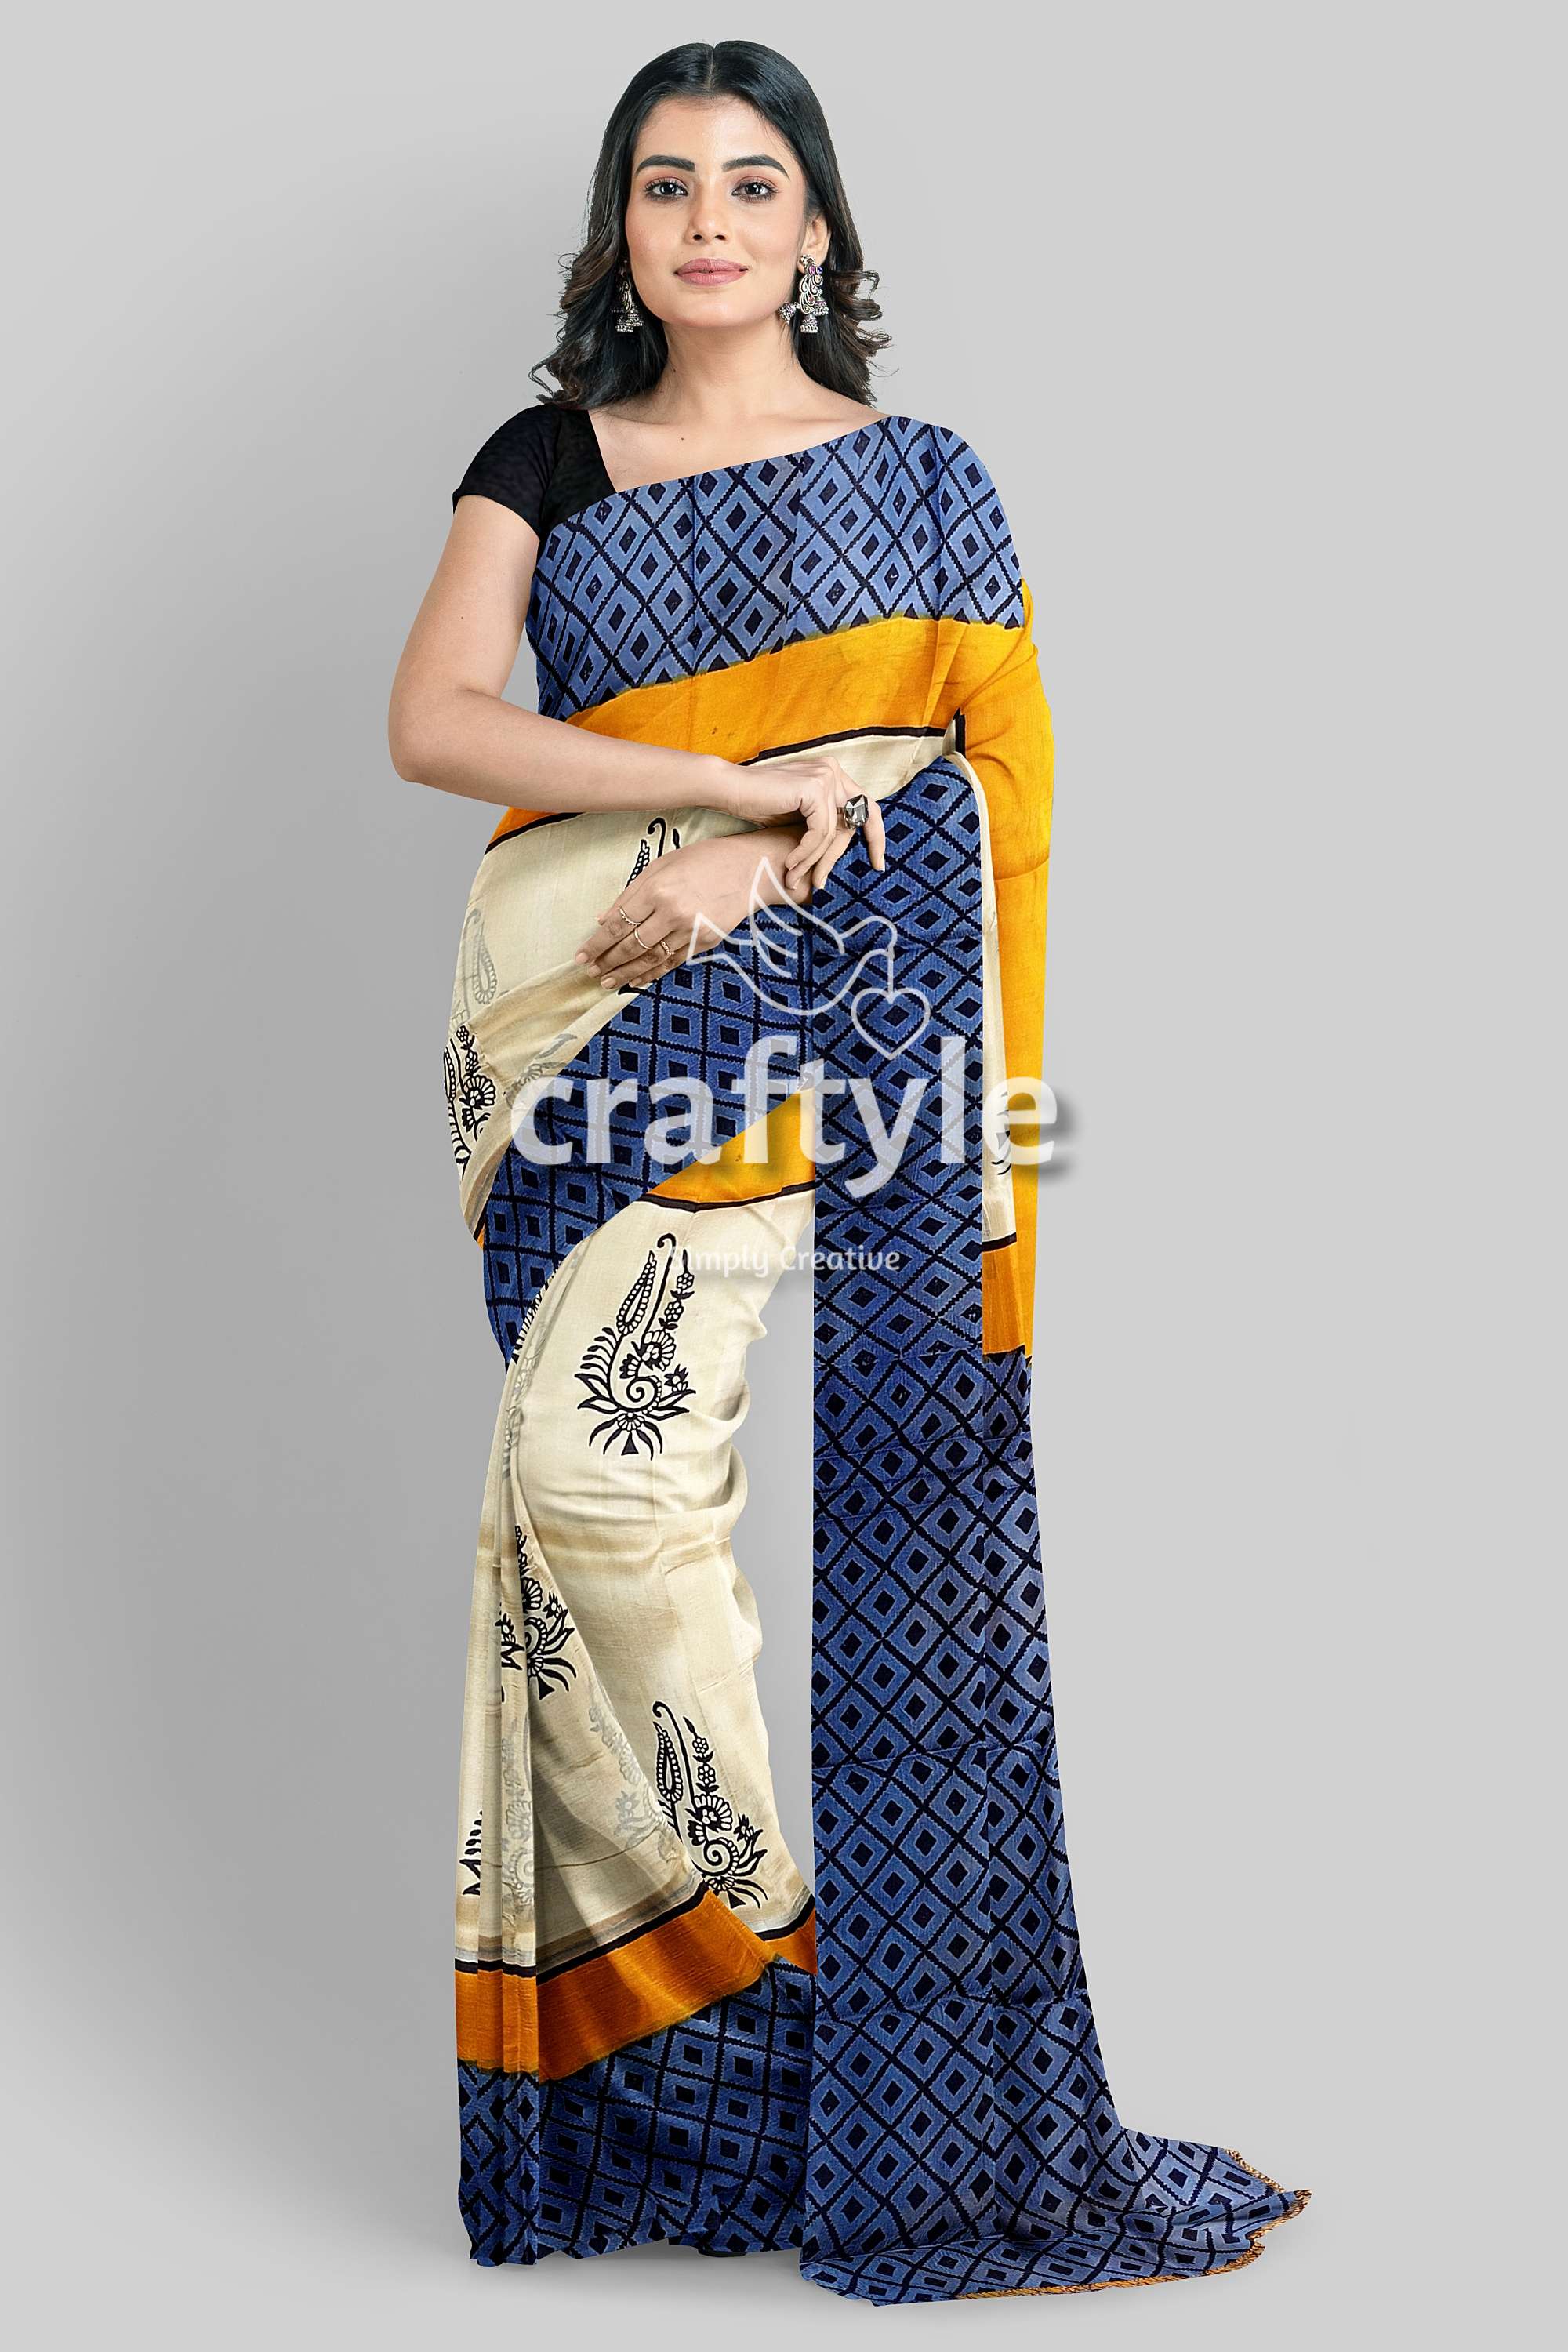 Hand Block Printed Mulberry Pure Silk Saree in White and Stone Blue - Craftyle